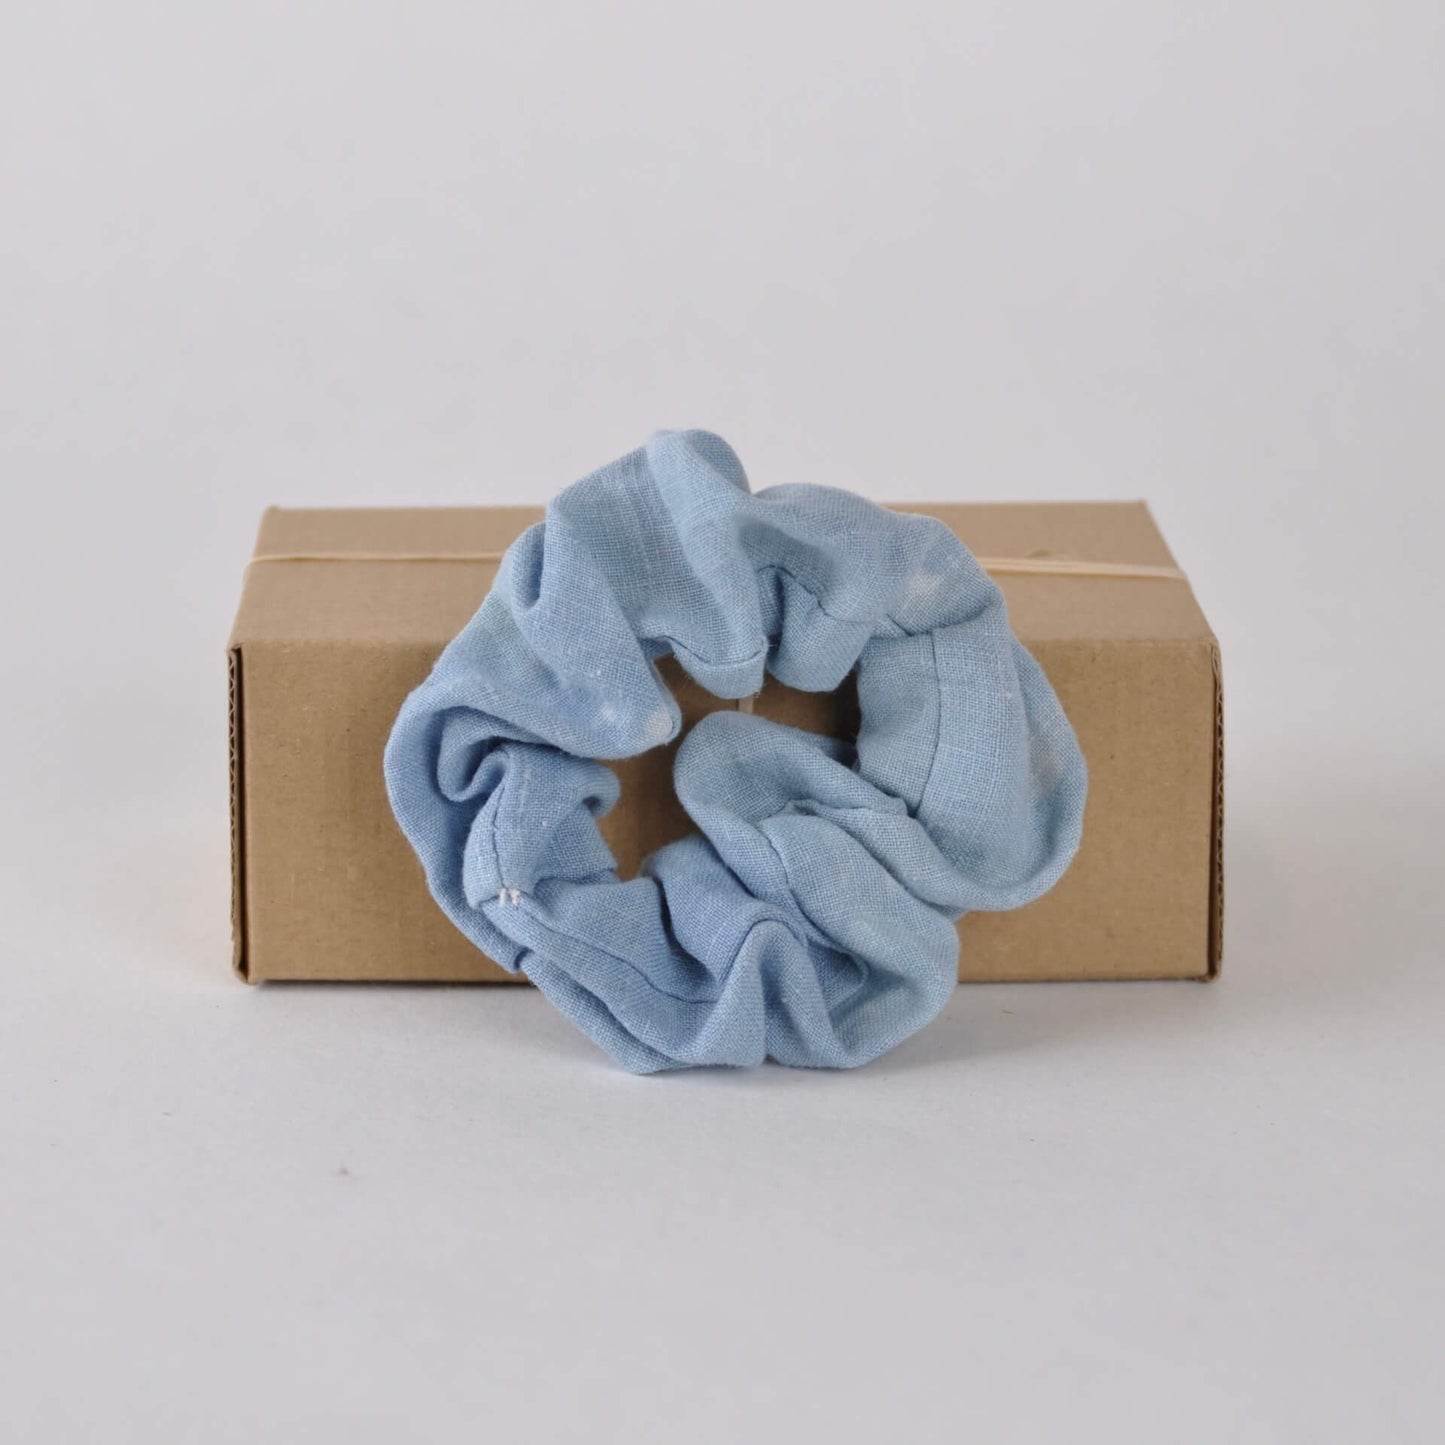 COCOON Natural Dye House Scrunchy Naturally Dyed Hemp Scrunchie